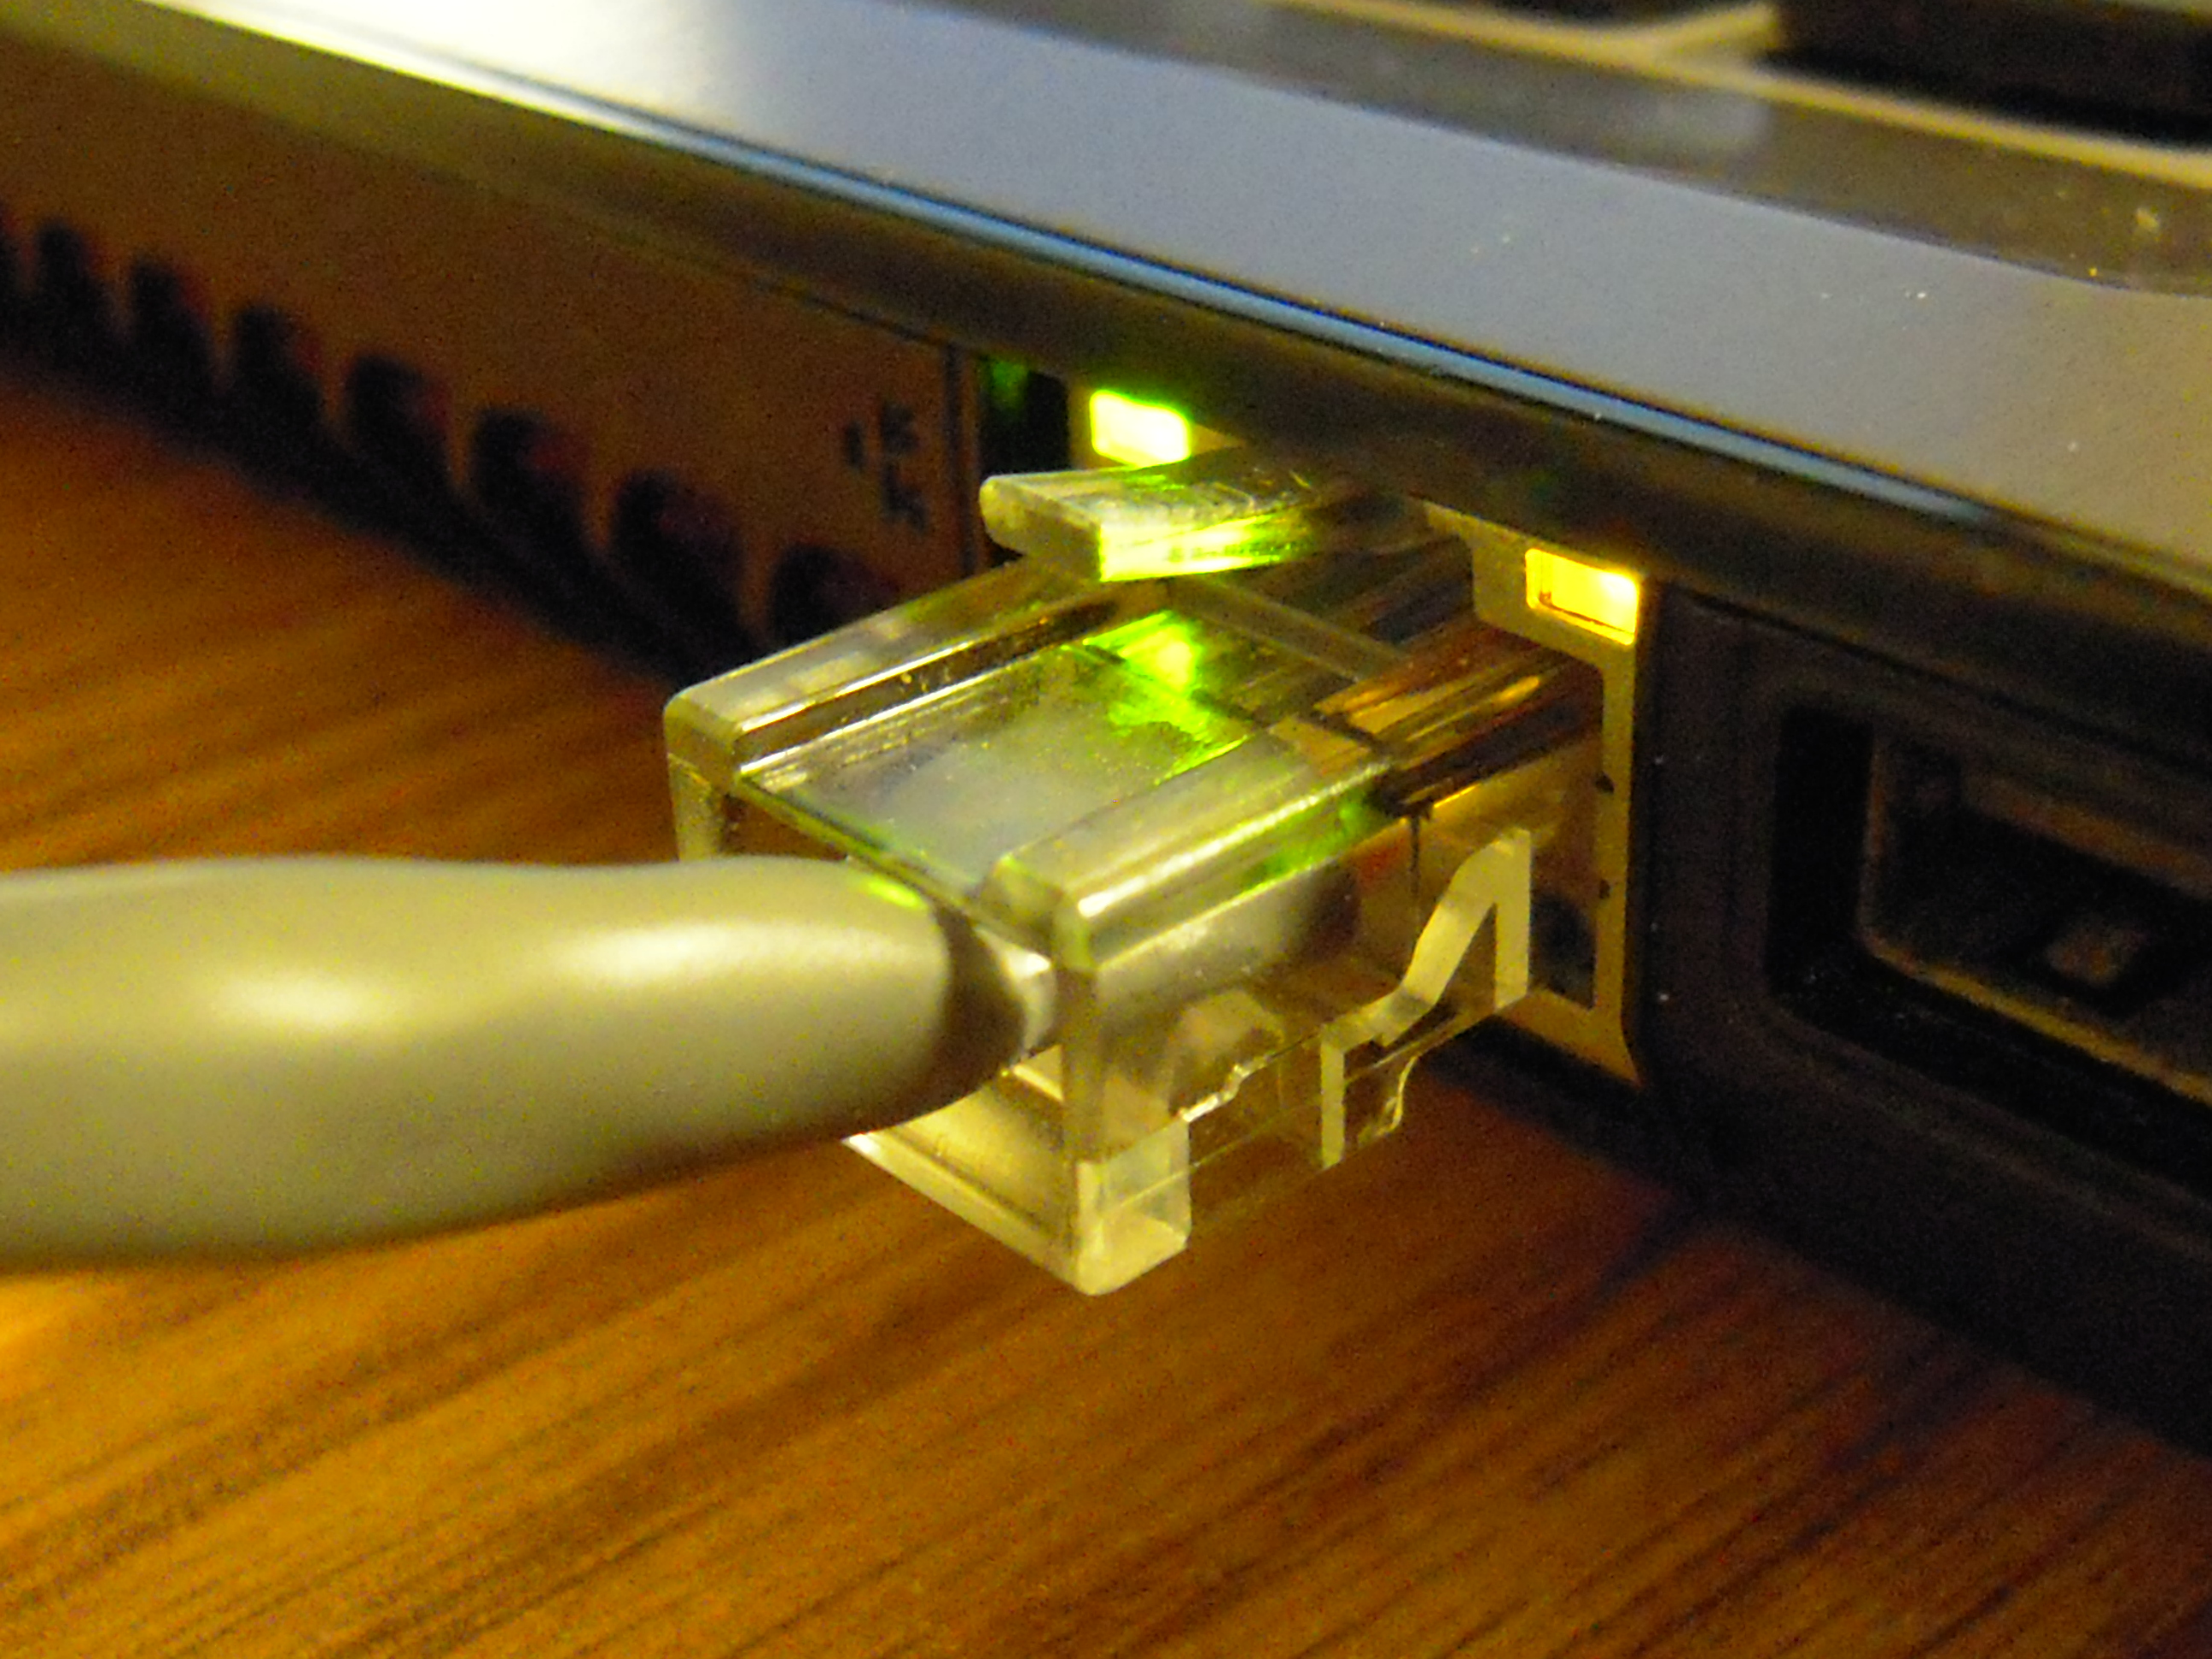 A network cable being plugged into a device.